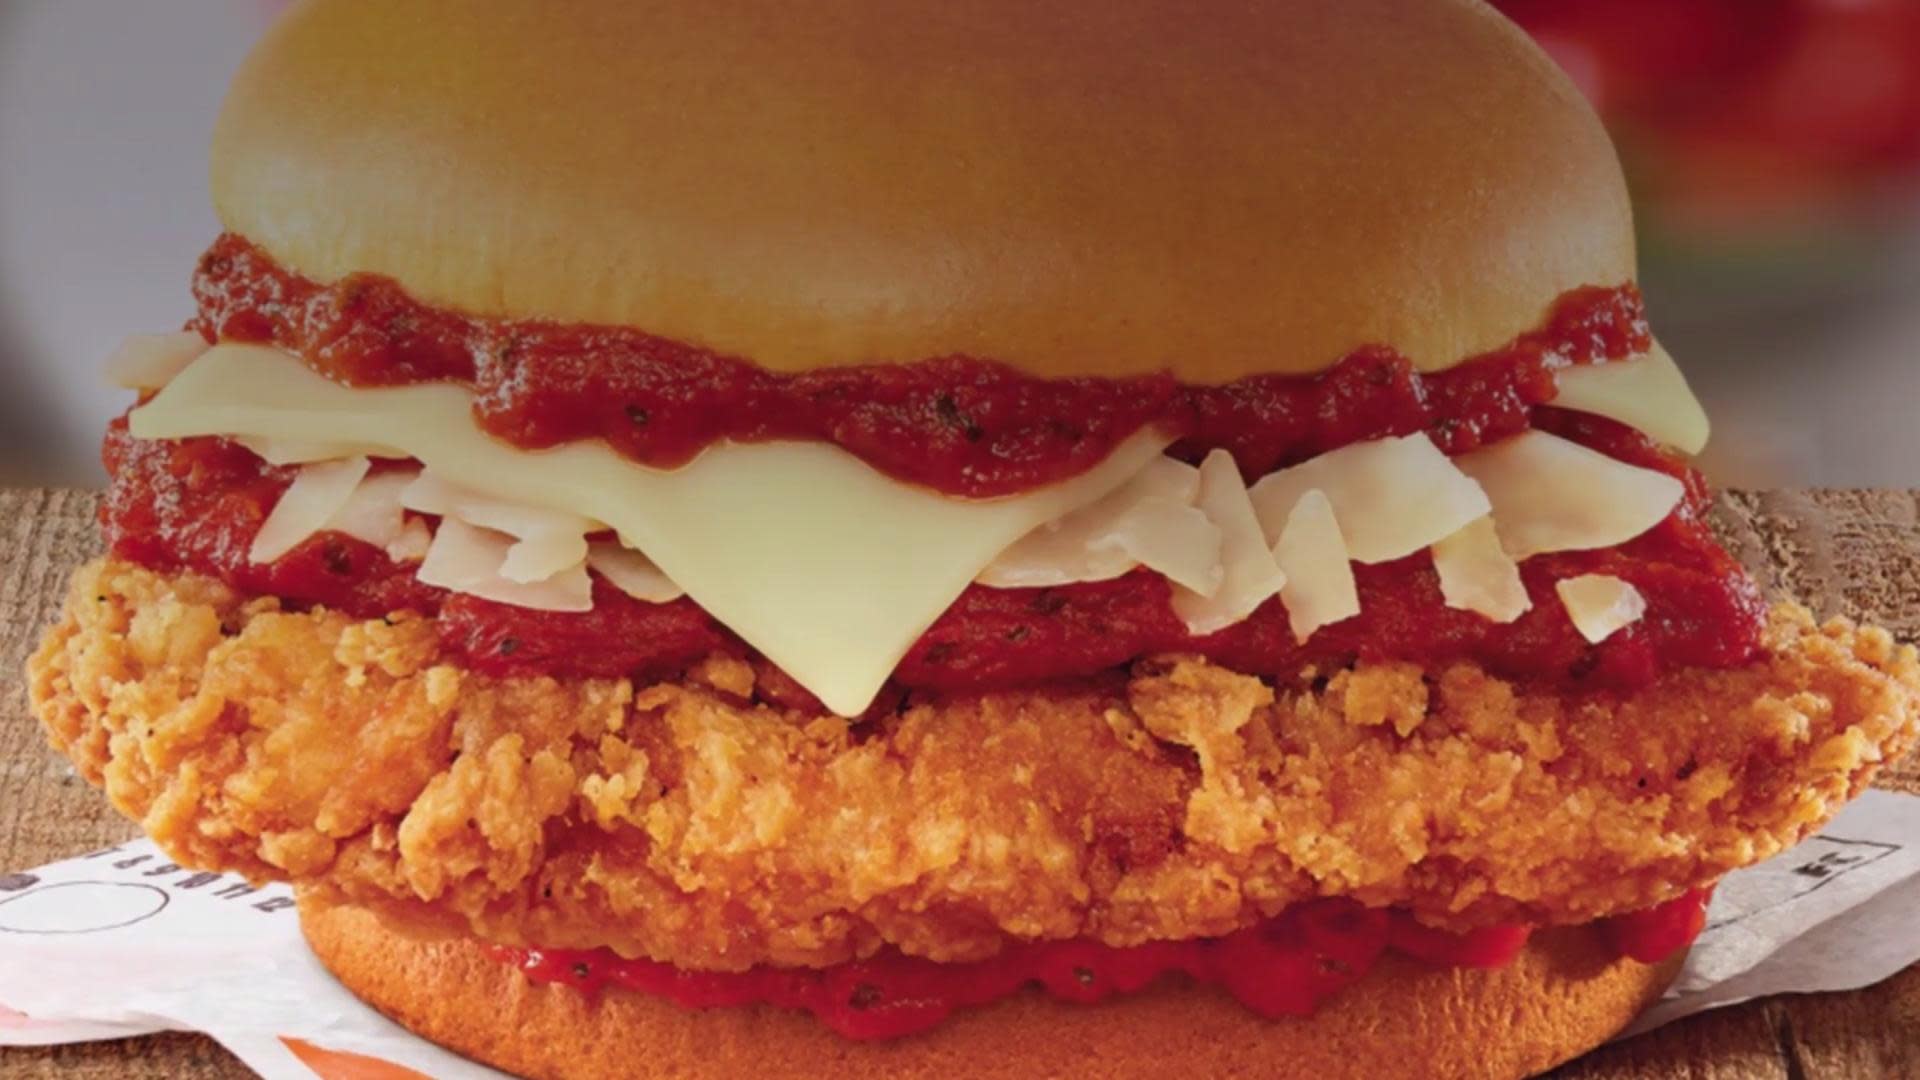 Burger King's Chicken Parmesan Sandwich Is BACK and It's Better Than Ever